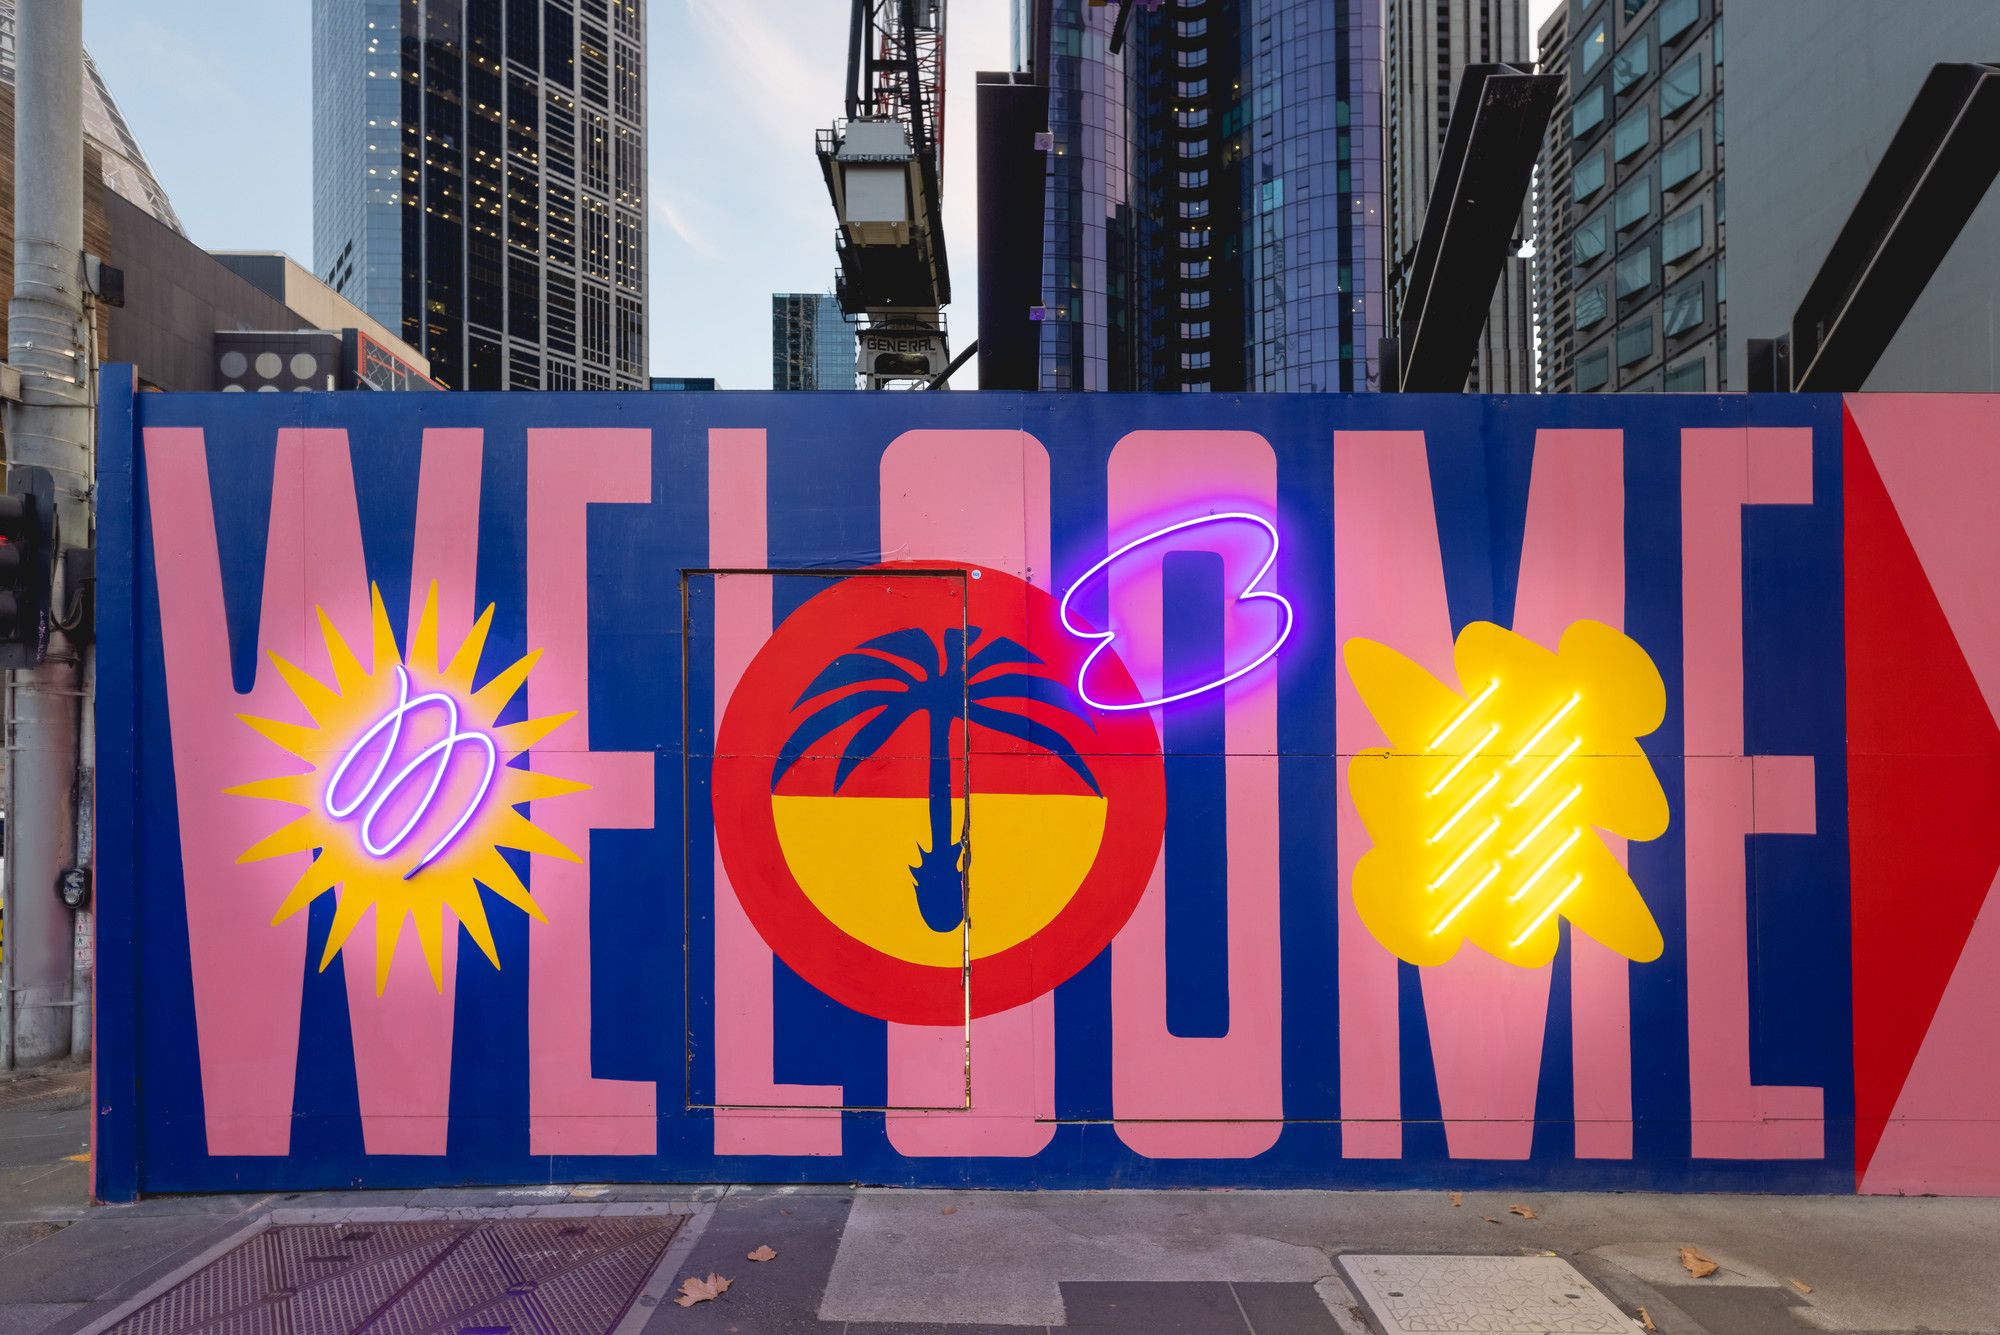 Artwork on a temporary construction fence says 'welcome' with neon lights in front of skyscrapers